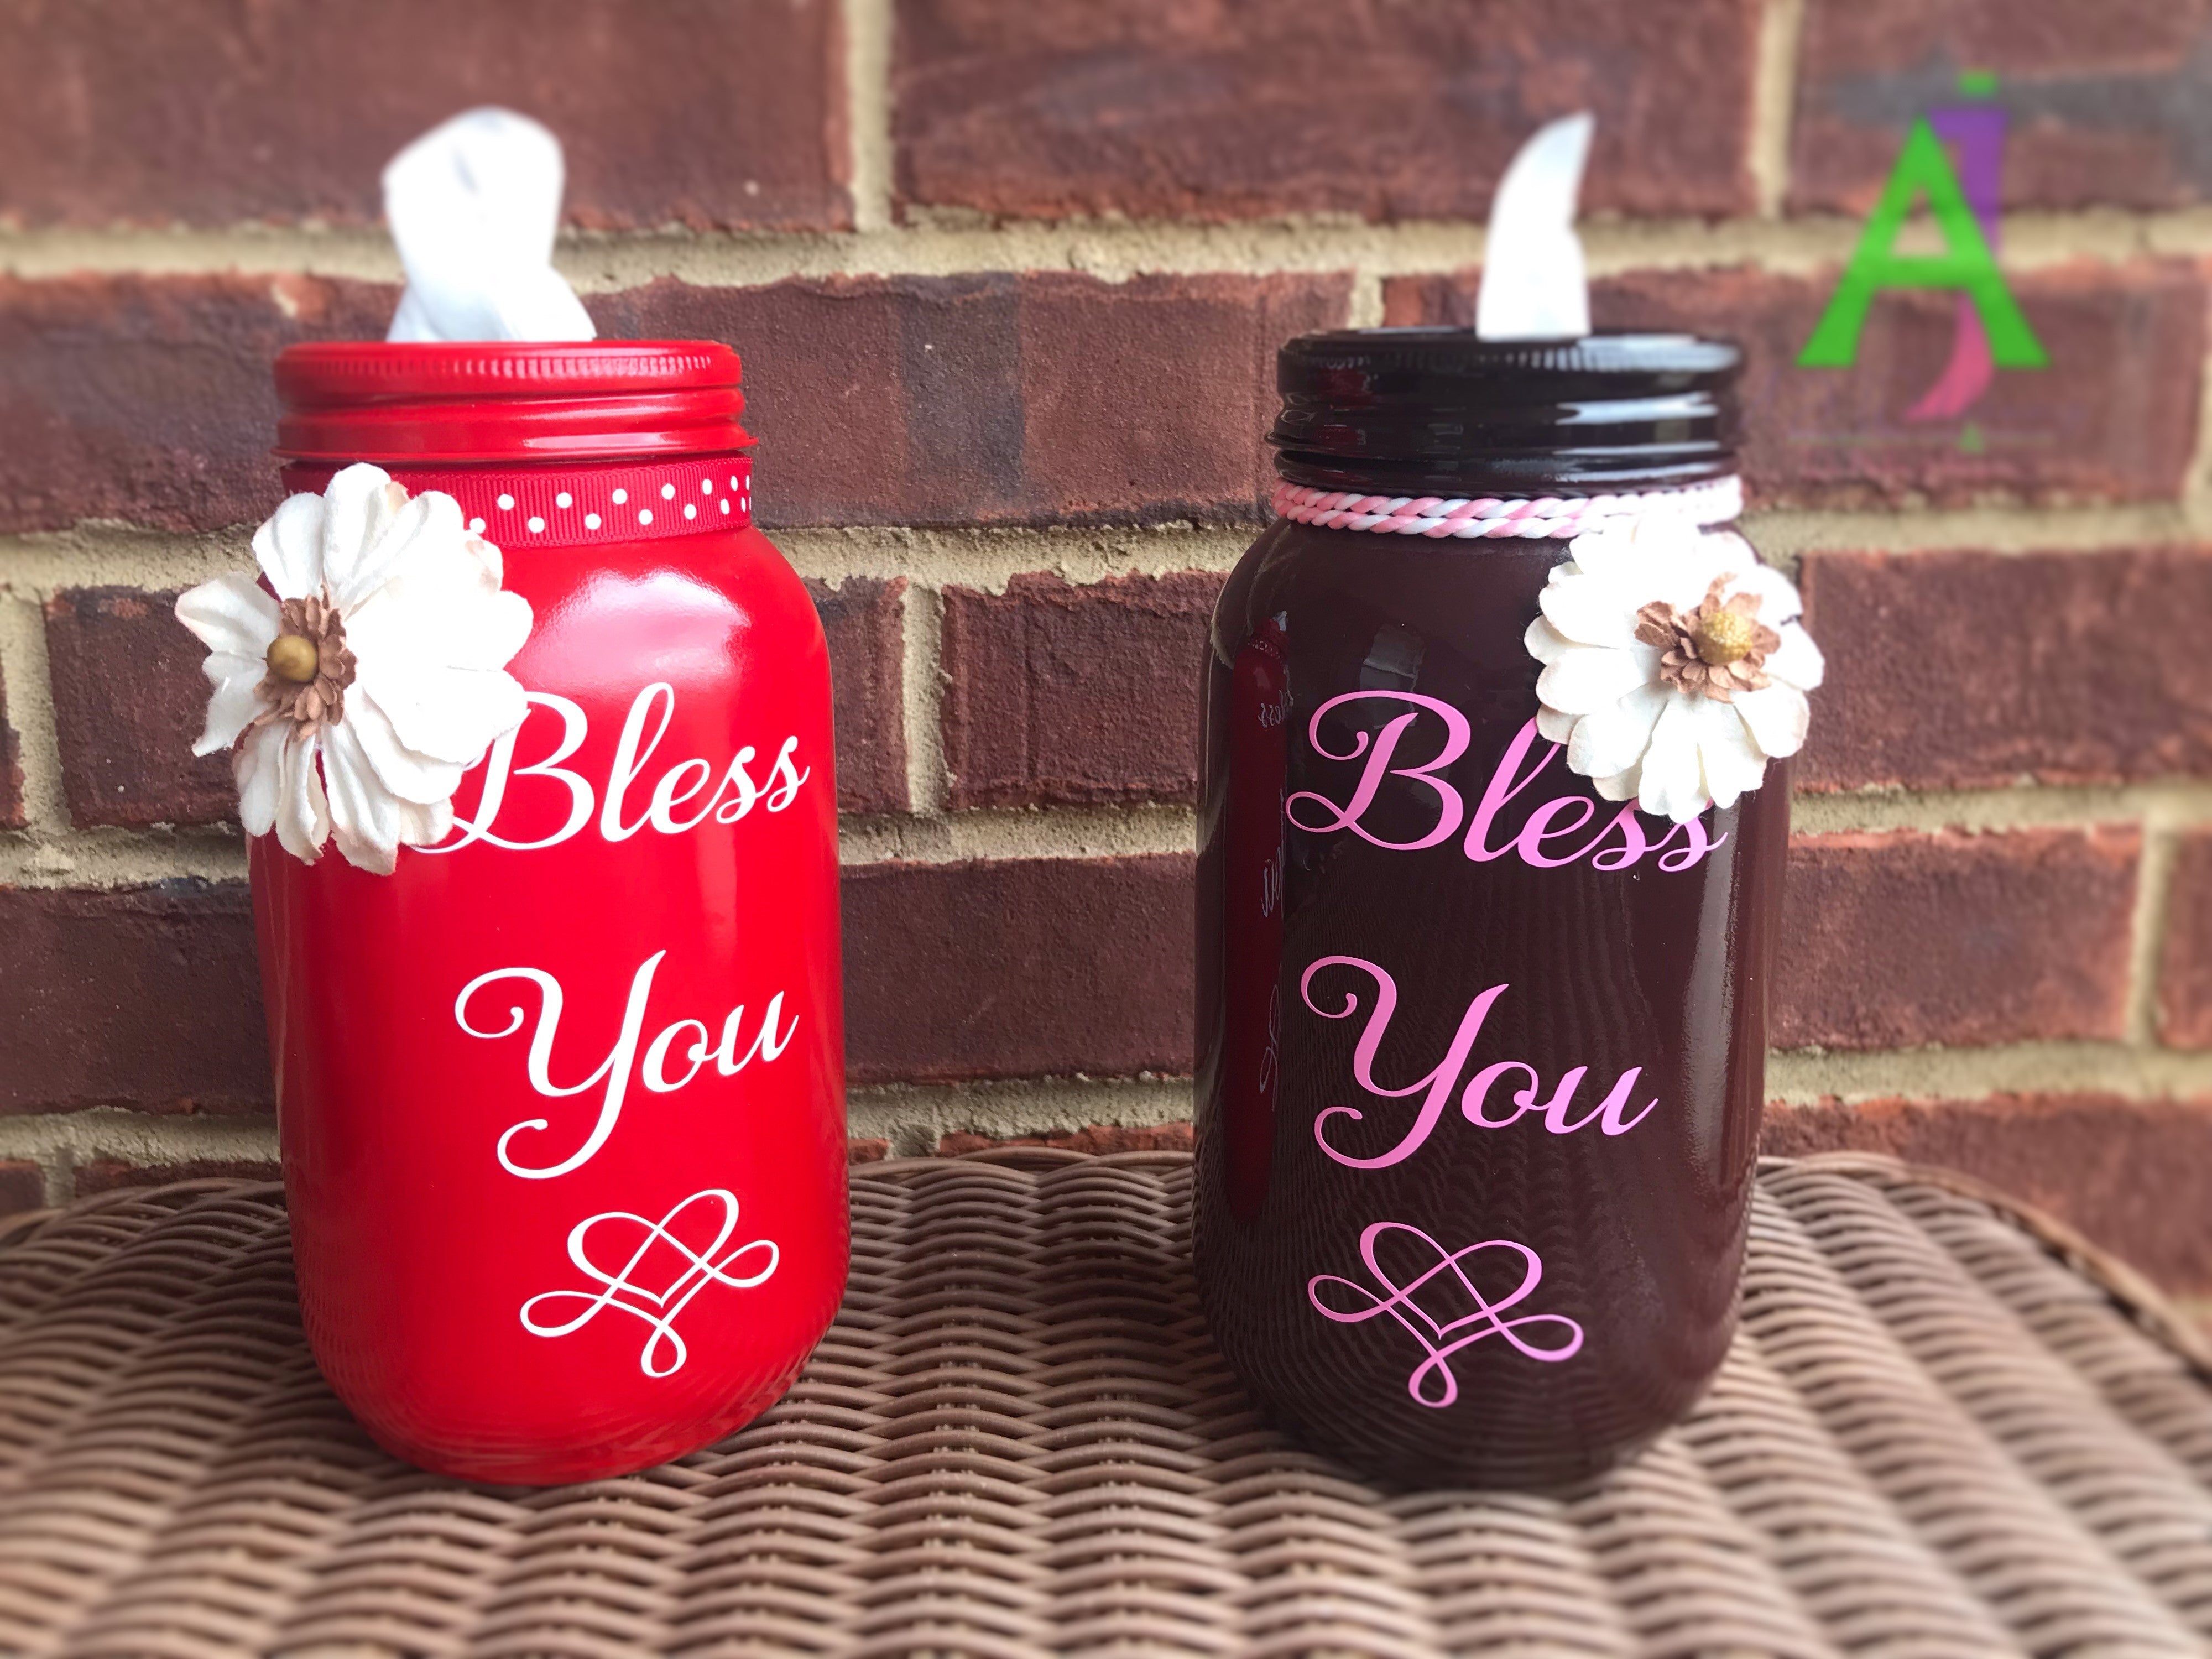 Bless Your Jars